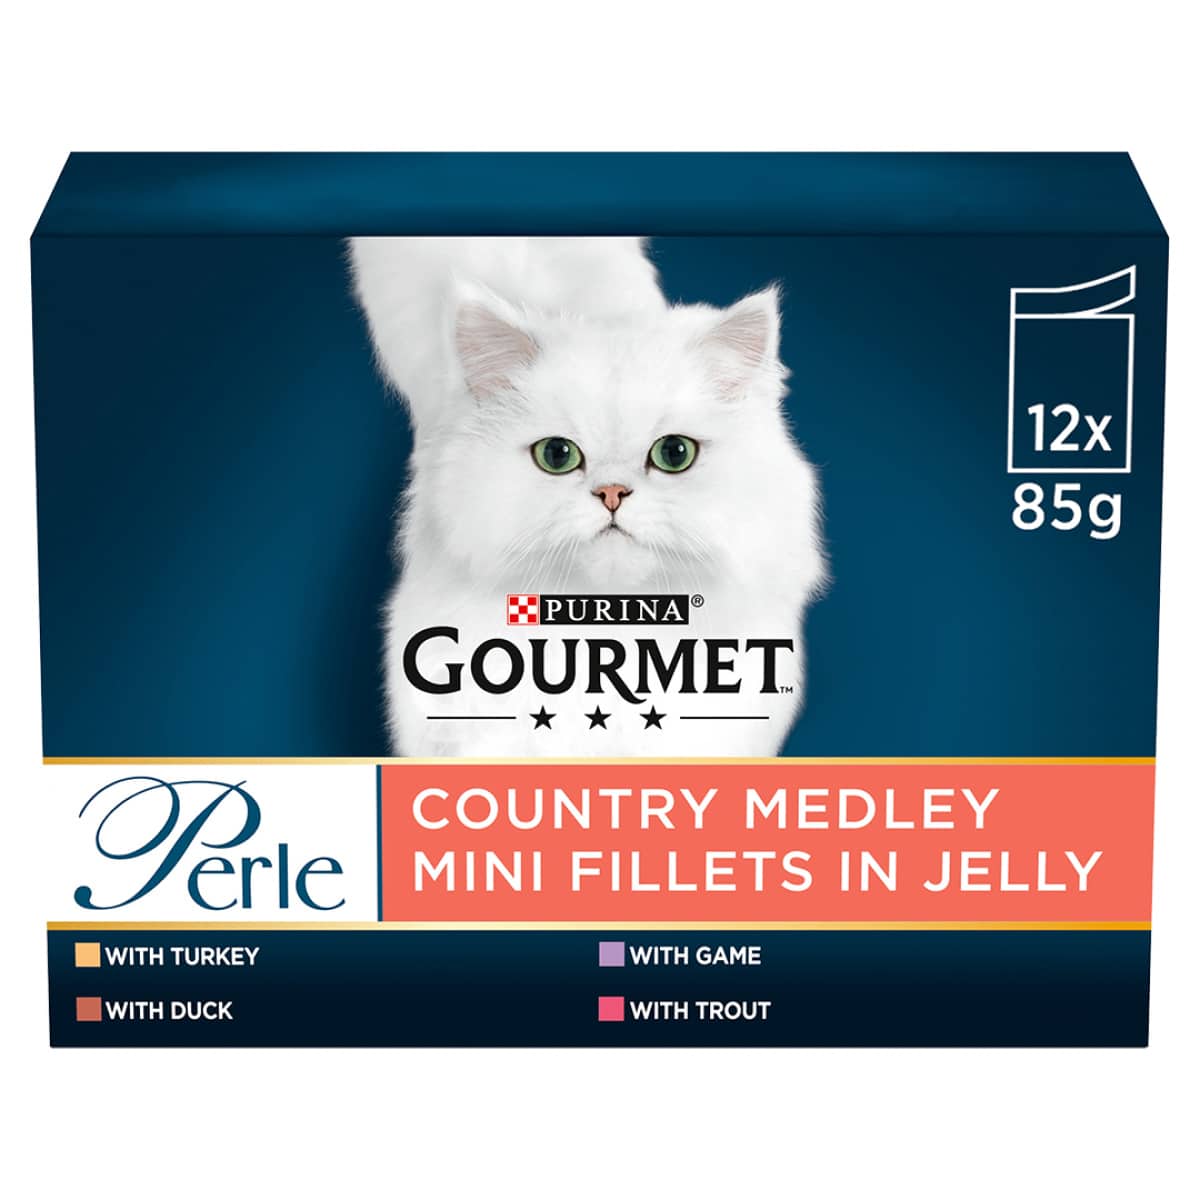 Gourmet Perle Country Medley in Jelly 12 x 85g Main Image